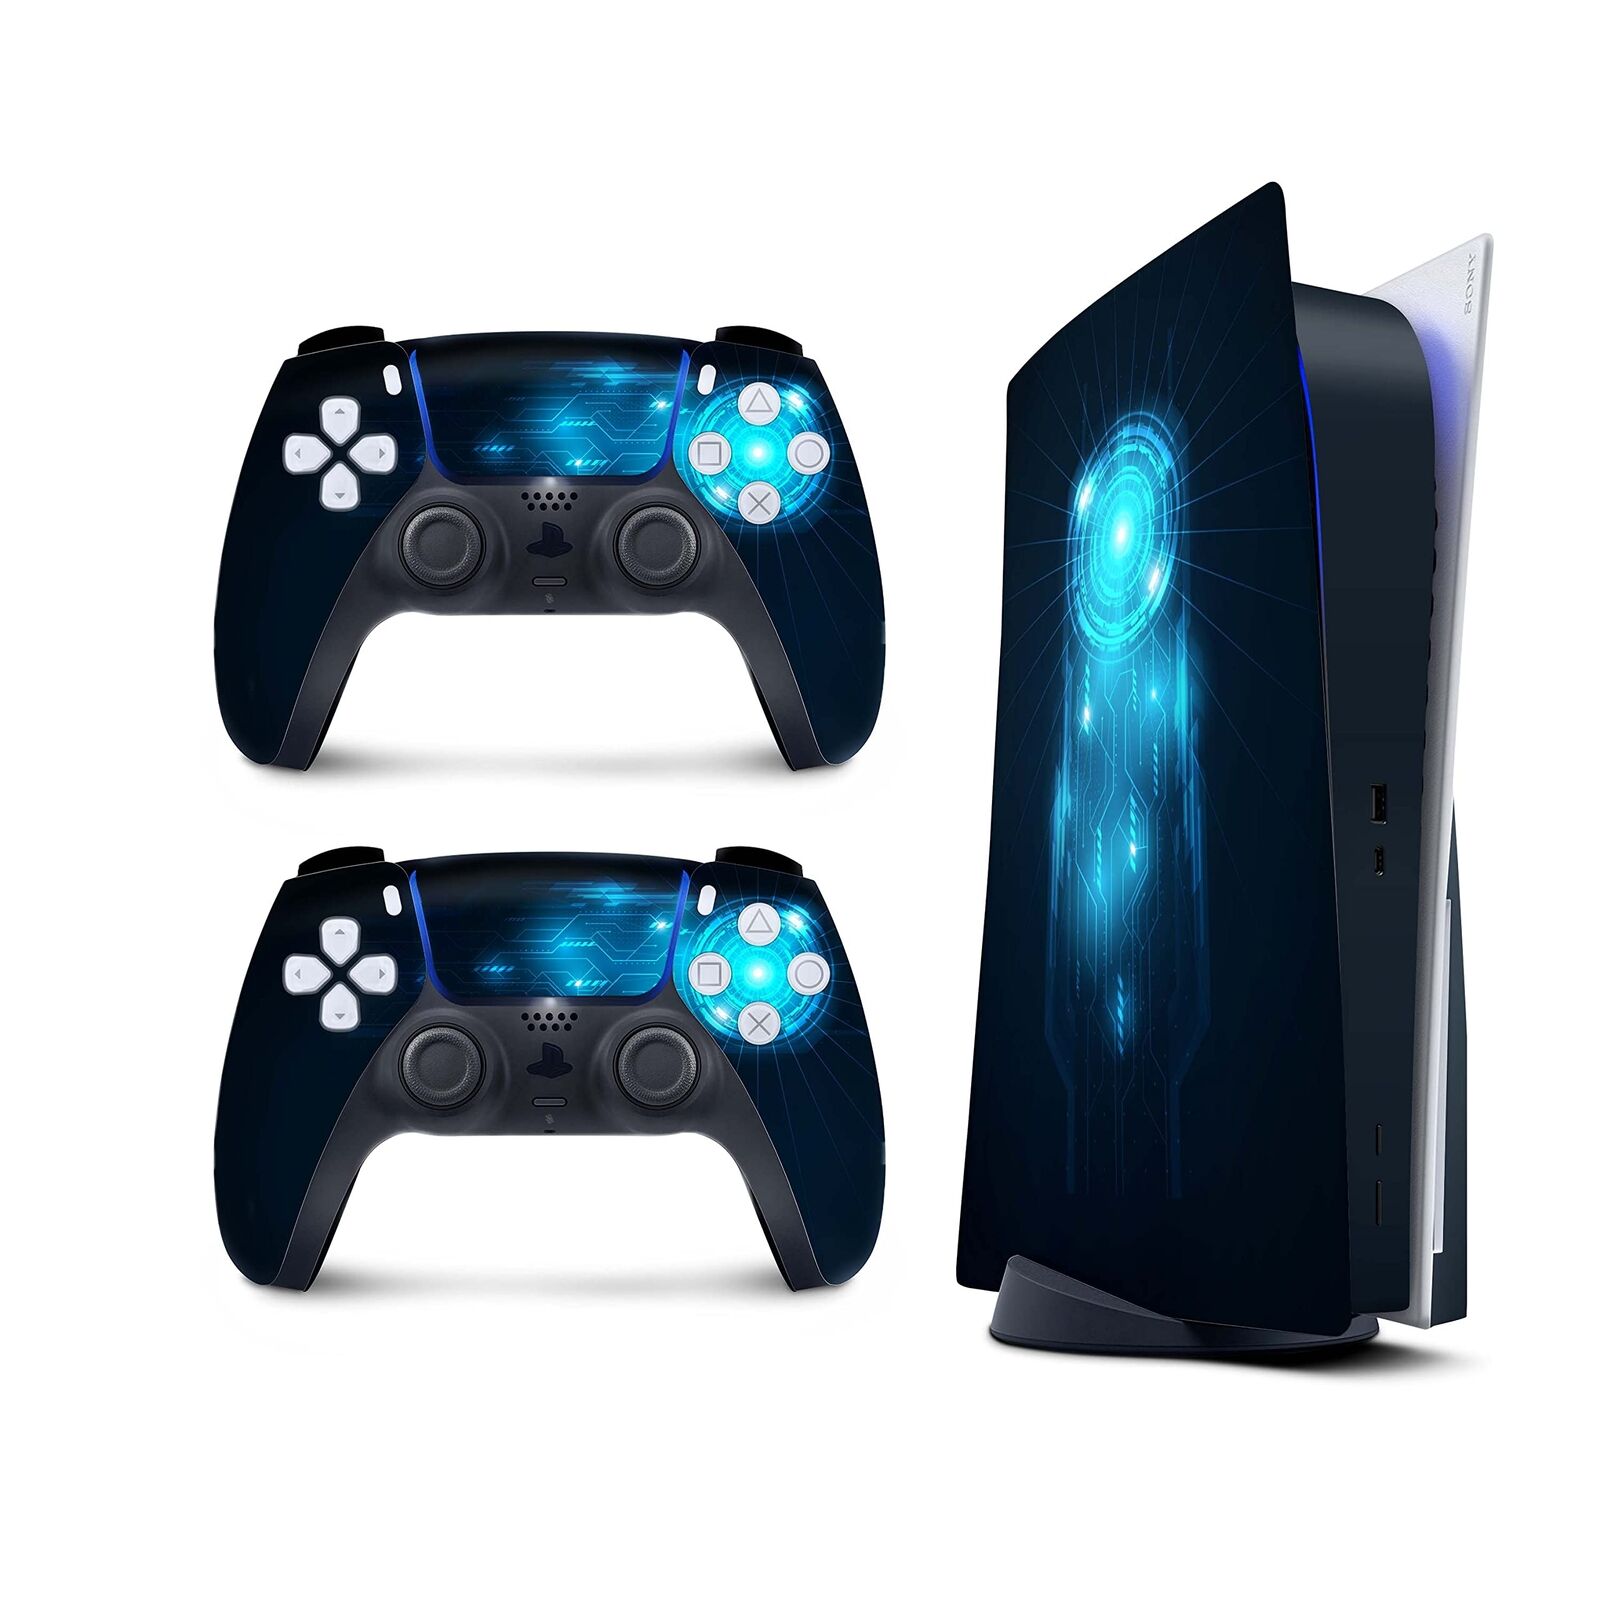 PS5 Blue Skin for PlayStation 5 Console and 2 Controllers, TECH skin Vinyl 3M...